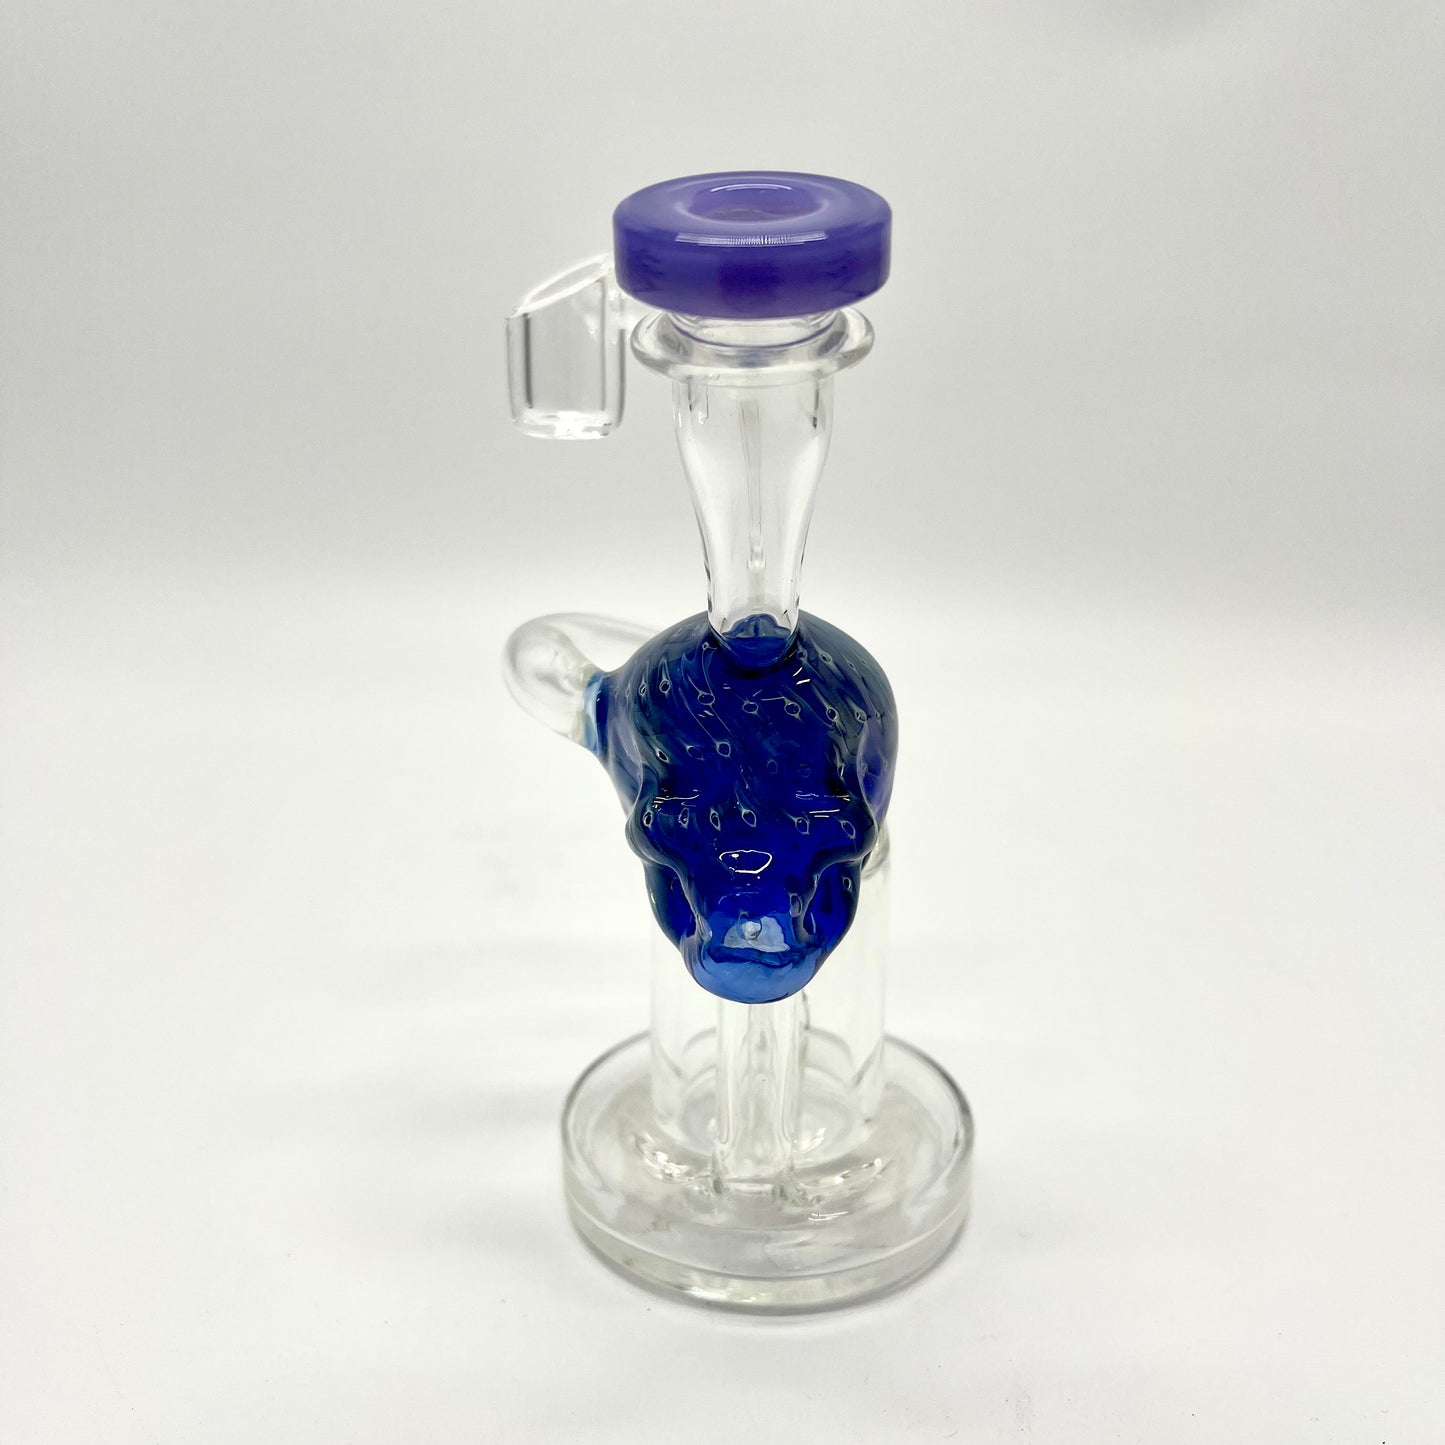 Weedo Small Glass Bongs Dab Rigs(14cm)(Special Edition Only 1 In Stock)